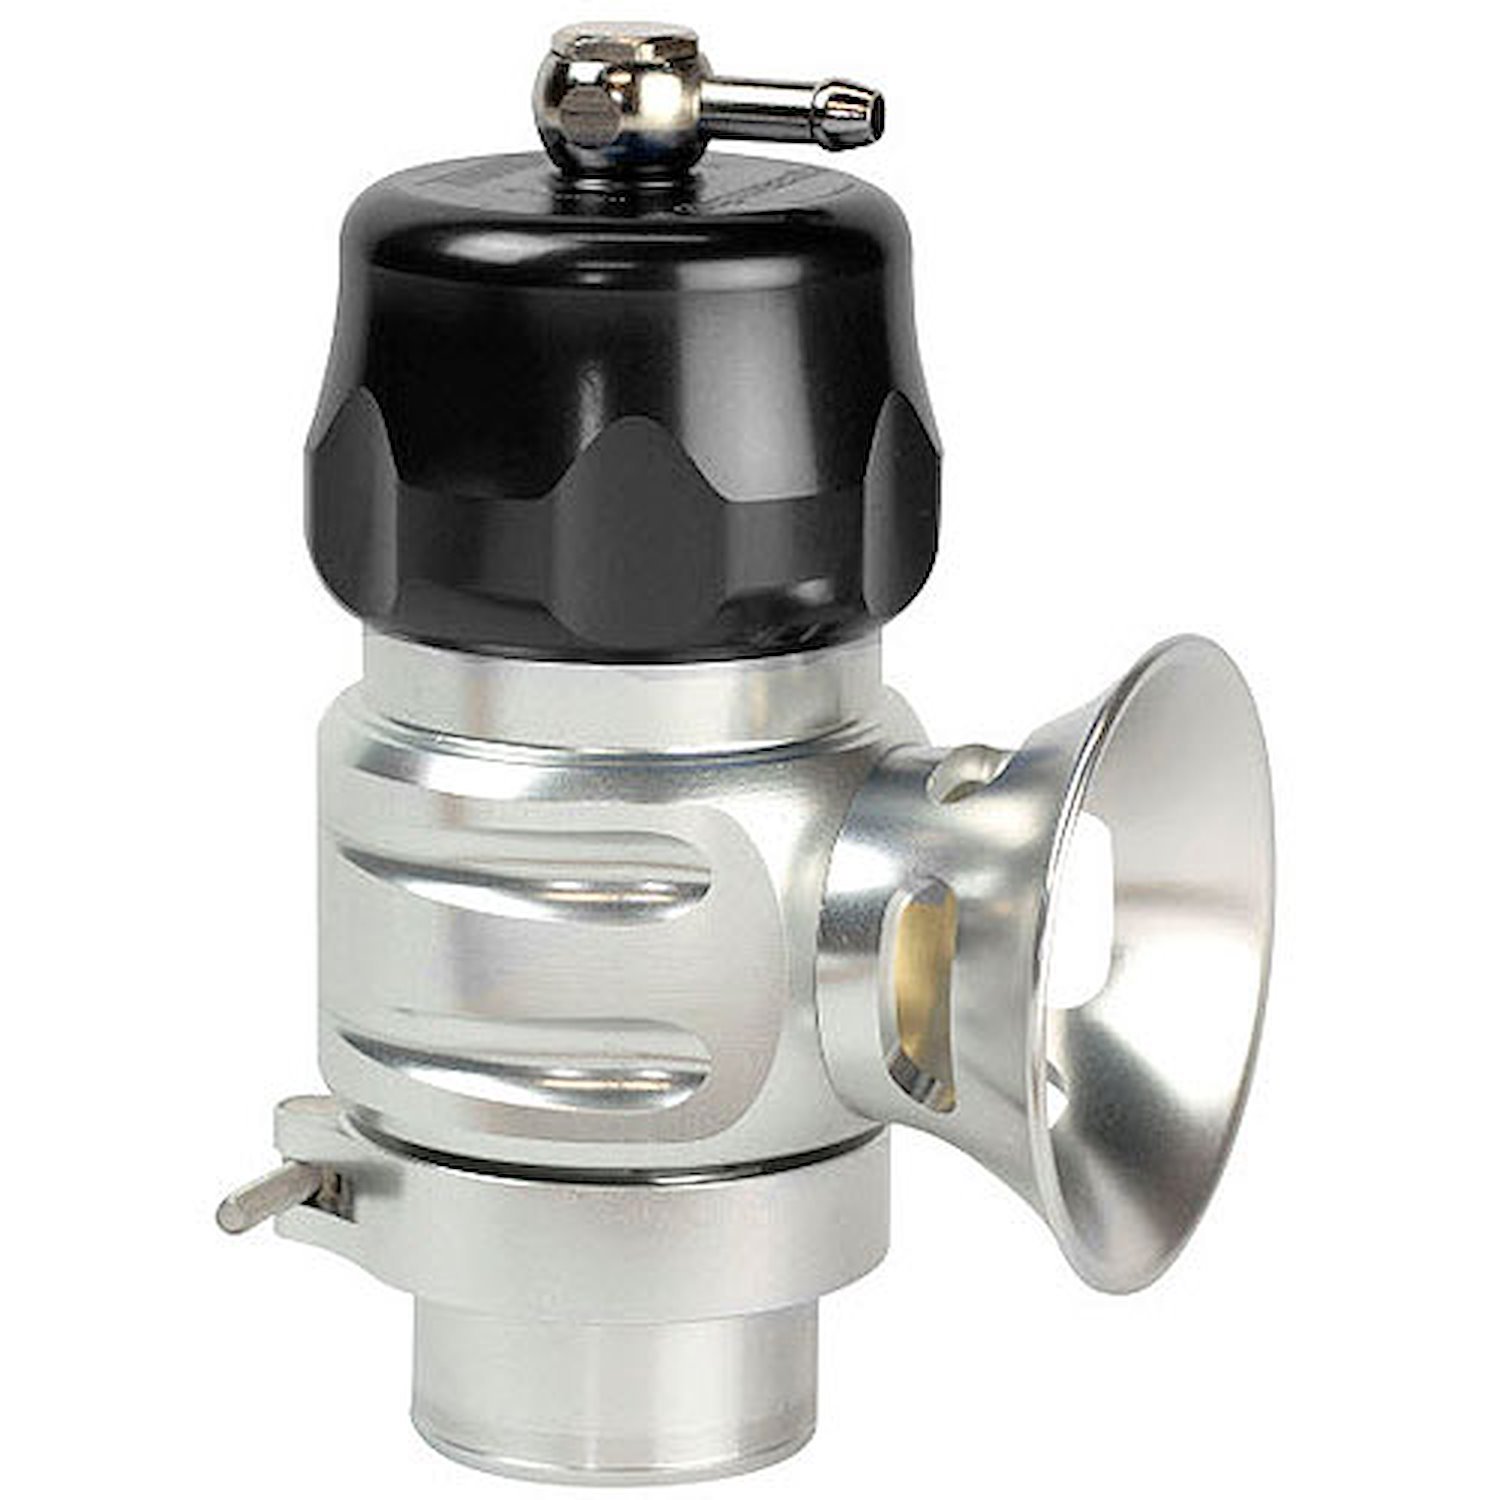 Supersonic Type 5 Blow-Off Valve Universal Application